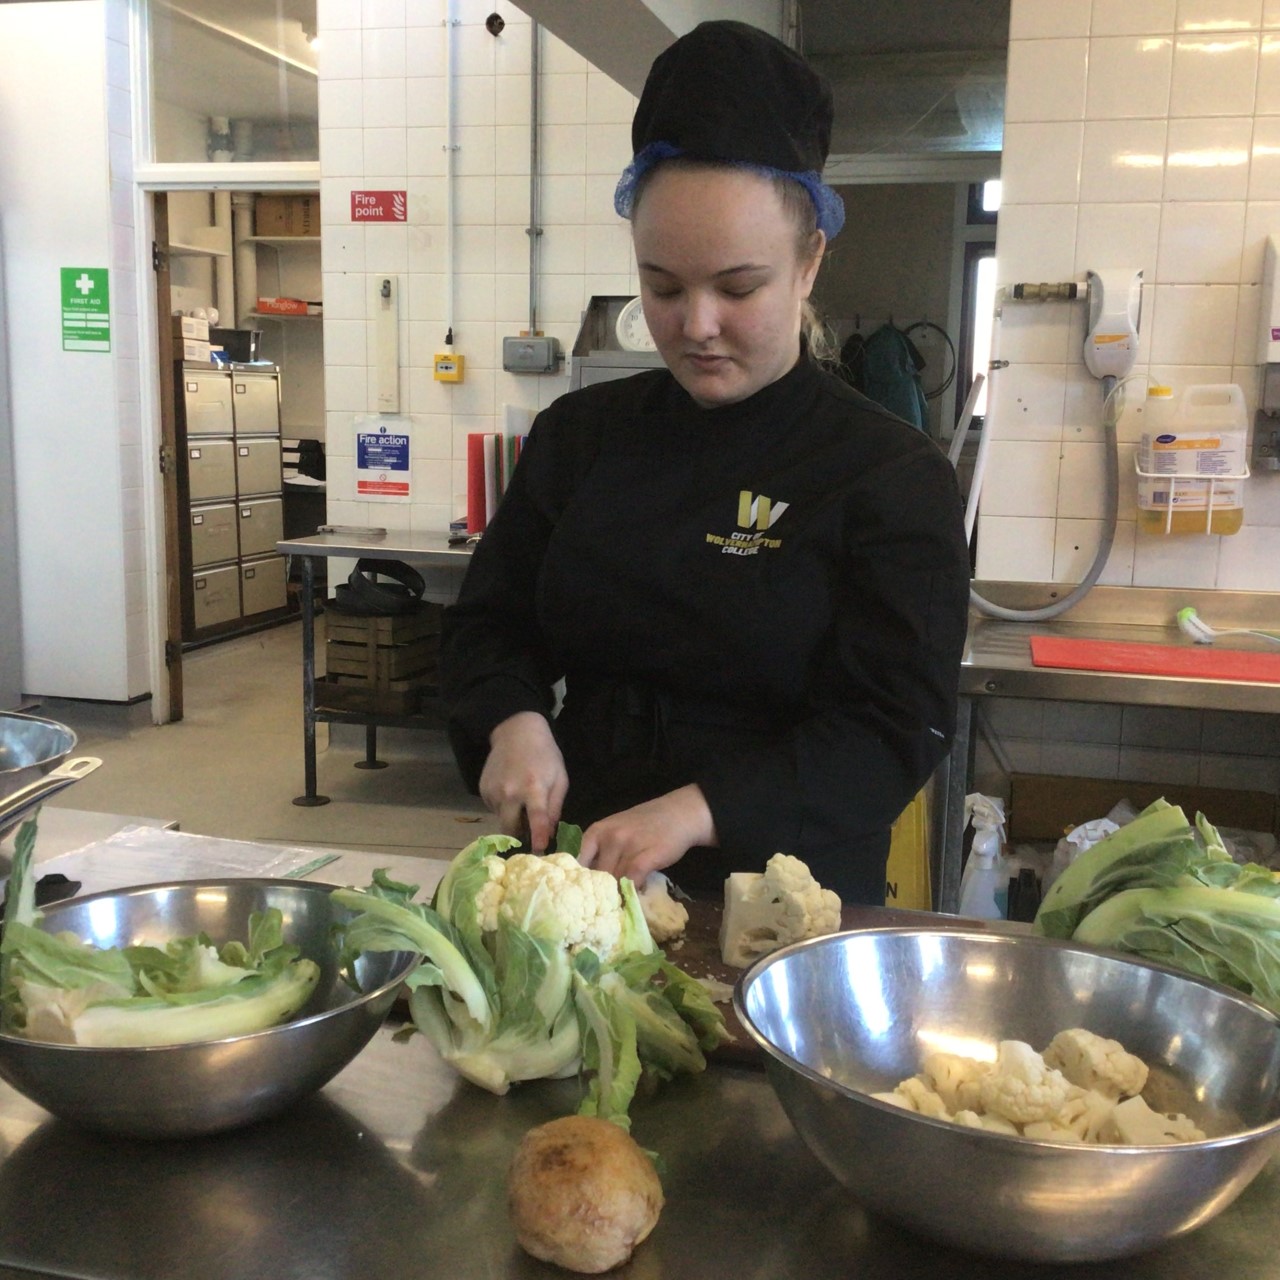 Professional cookery student Mercedes Banks, wearing a black uniform, preparing vegetables in the training kitchen